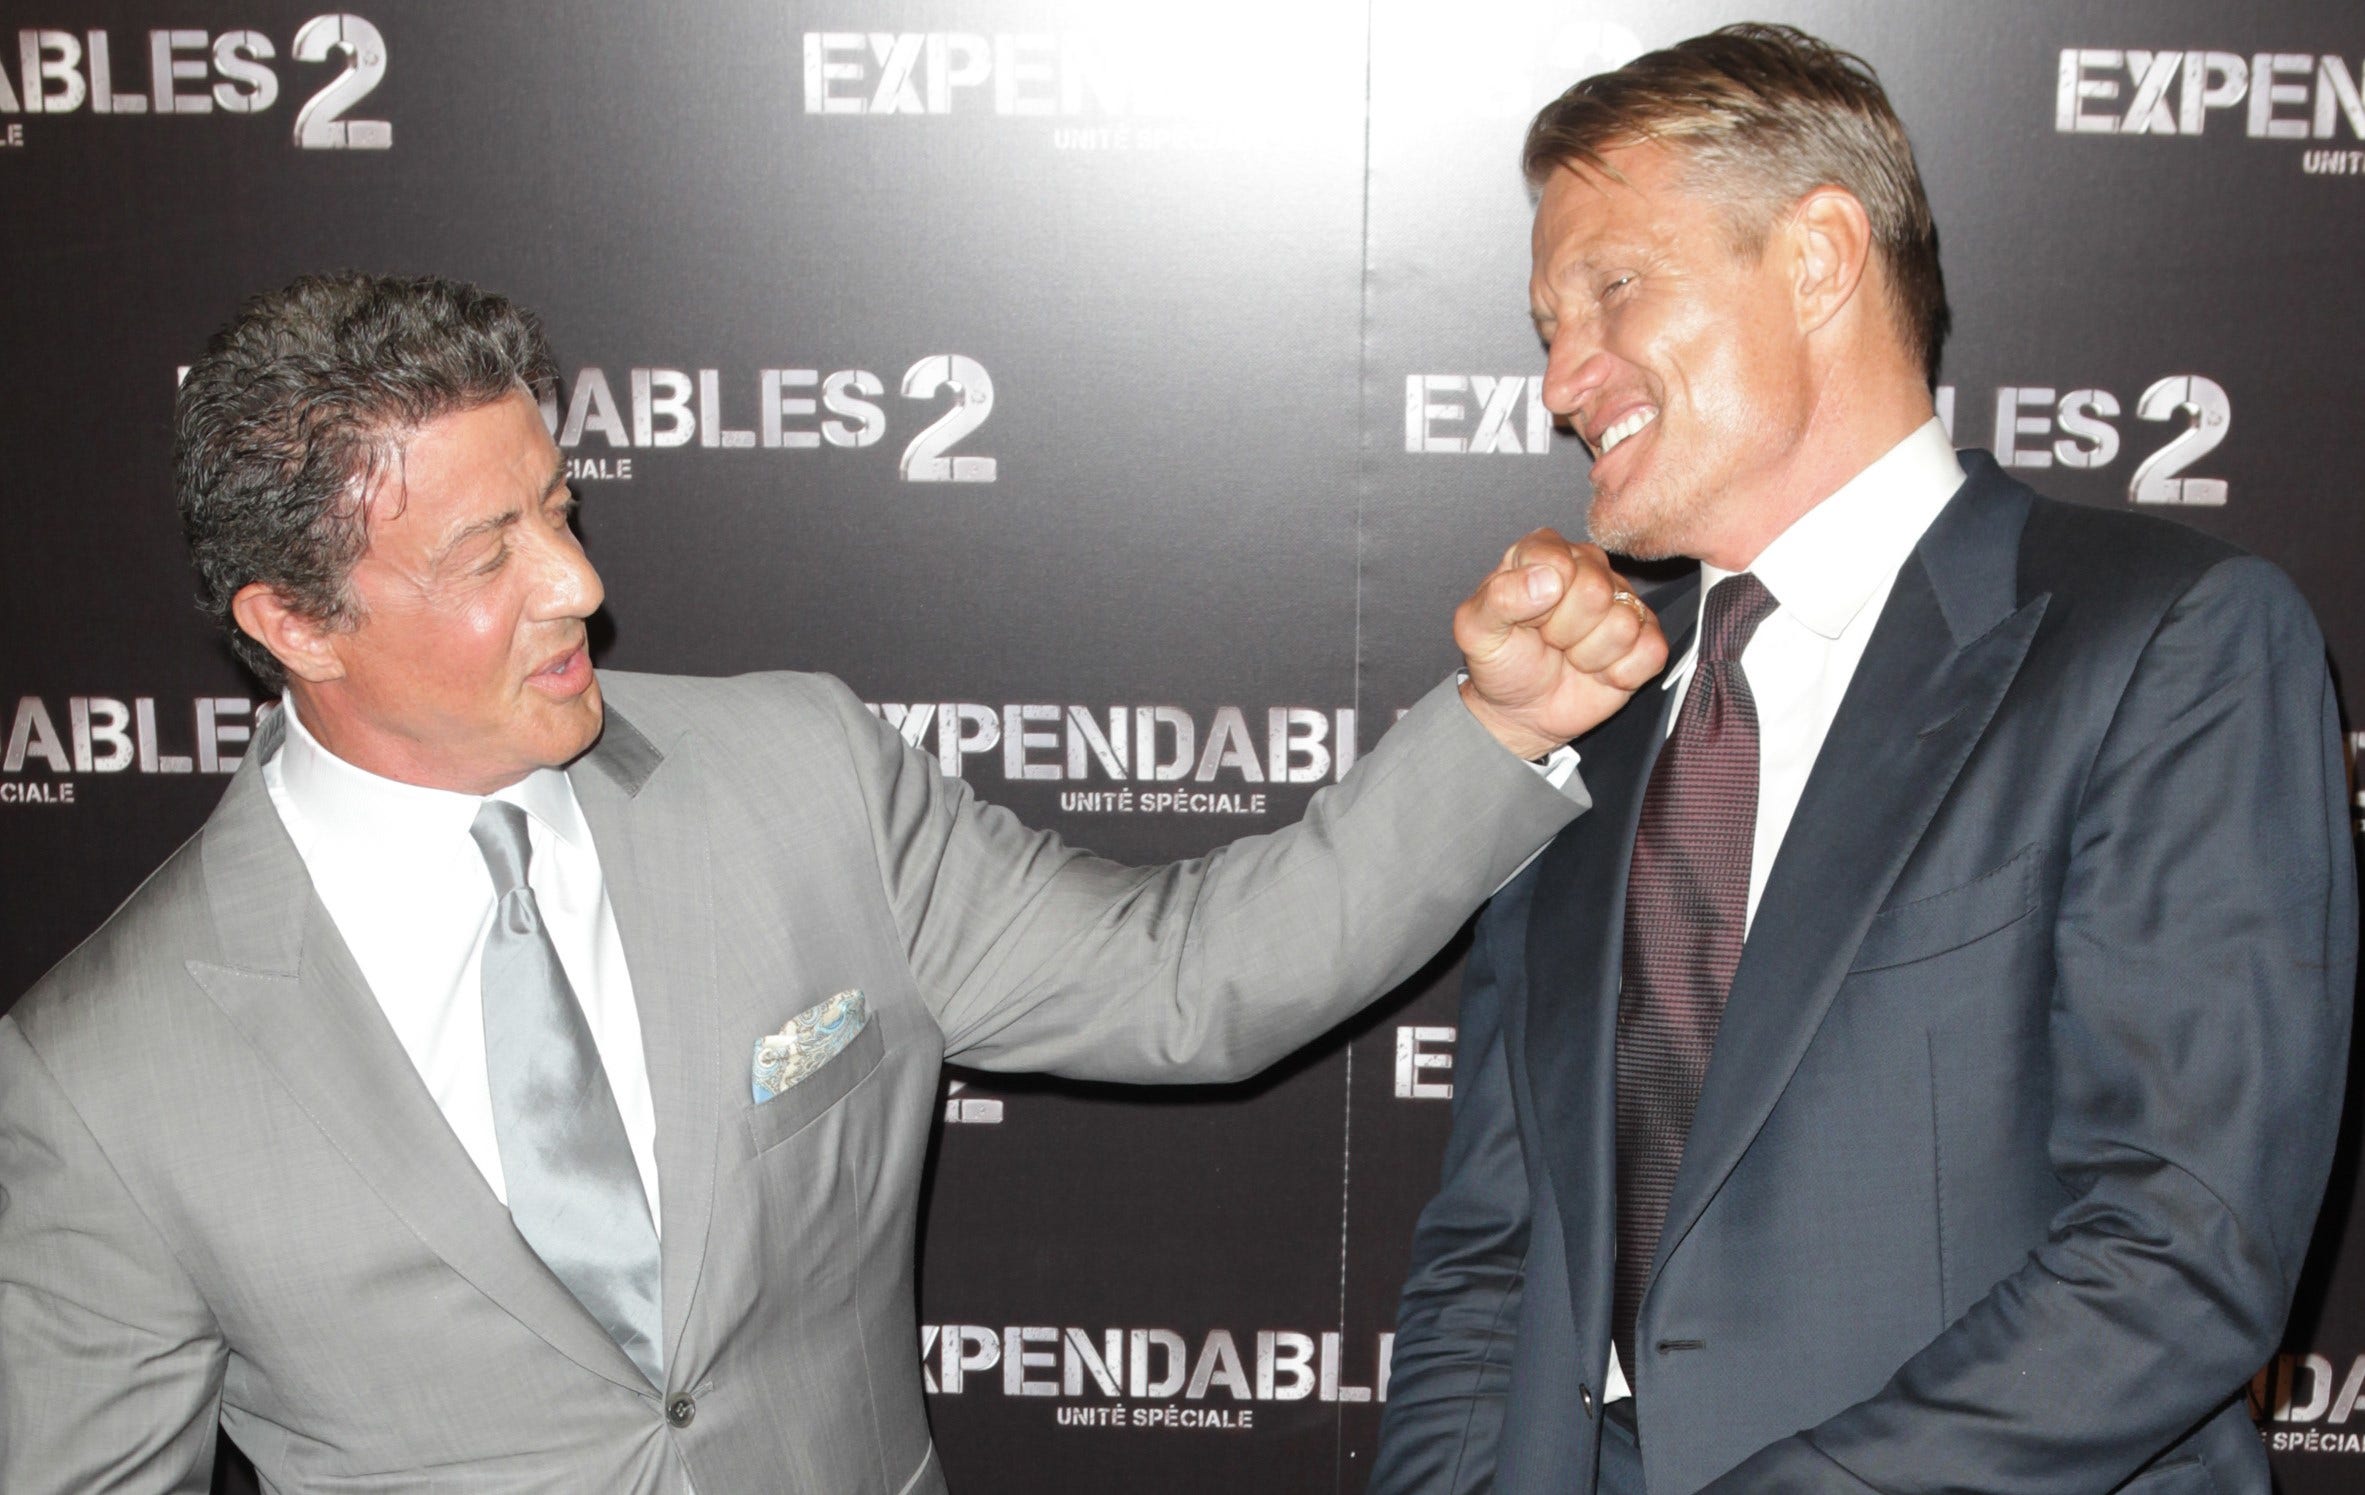 Dolph Lundgren, Sylvester Stallone nearly came to blows on set of 'The Expendables'